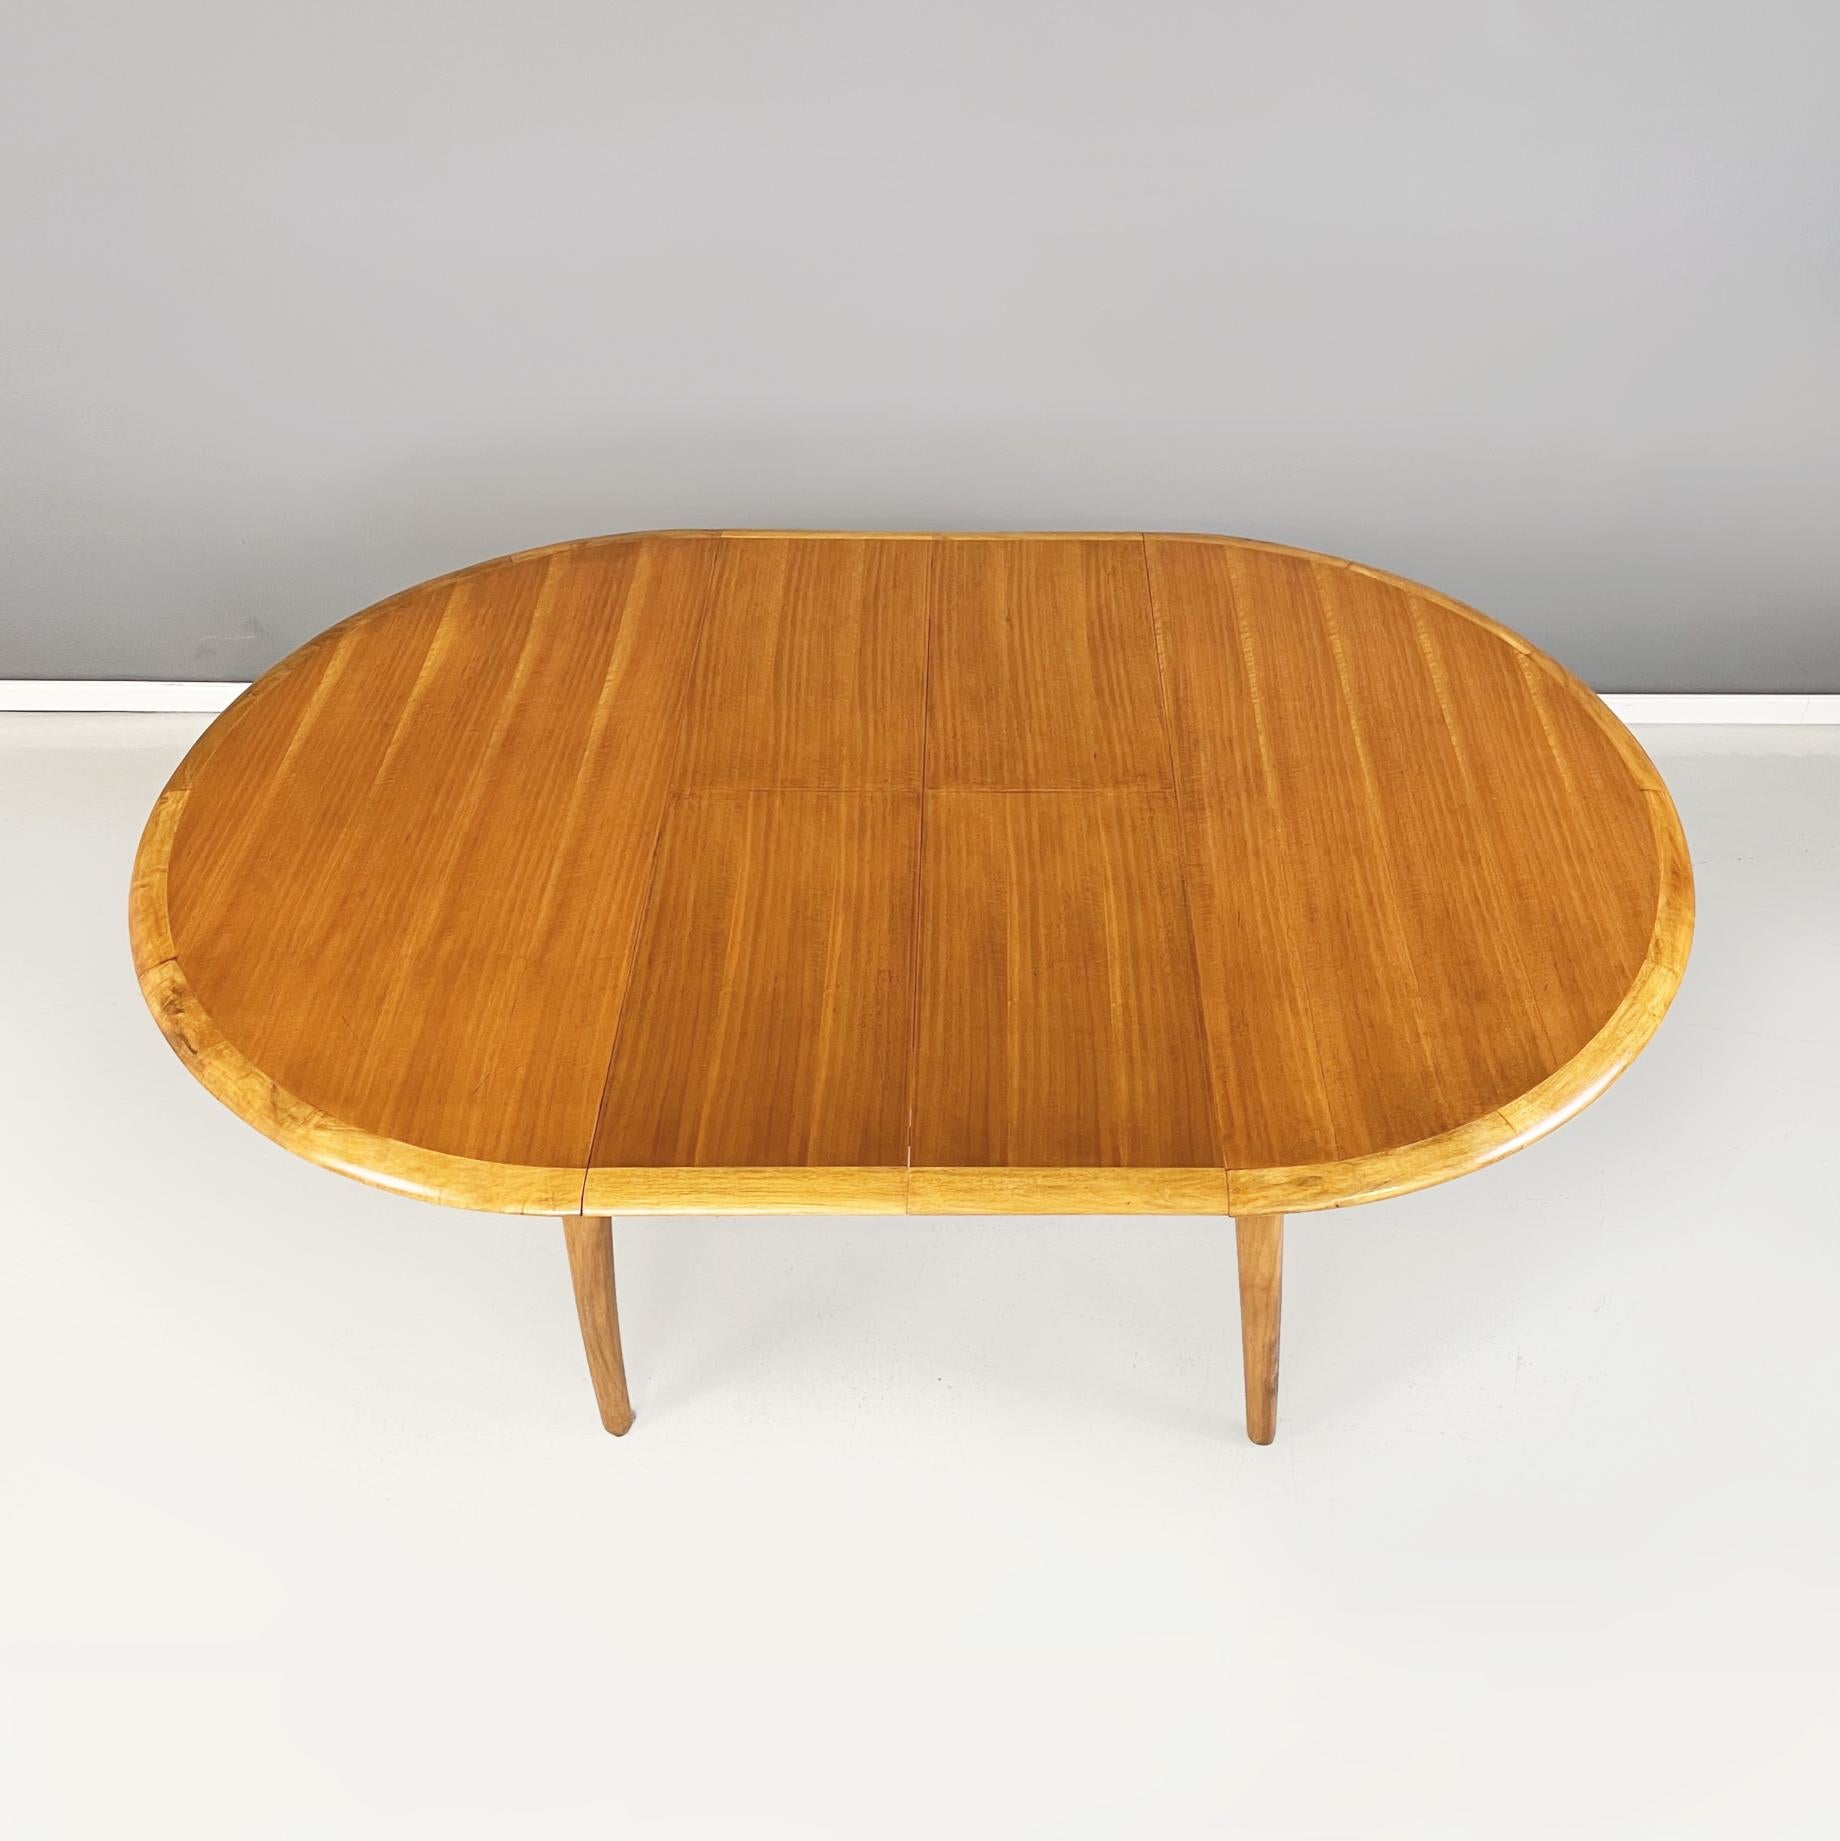 North Europa Midcentury Oval Round Wooden Dining Table with Extensions, 1960s In Good Condition For Sale In MIlano, IT